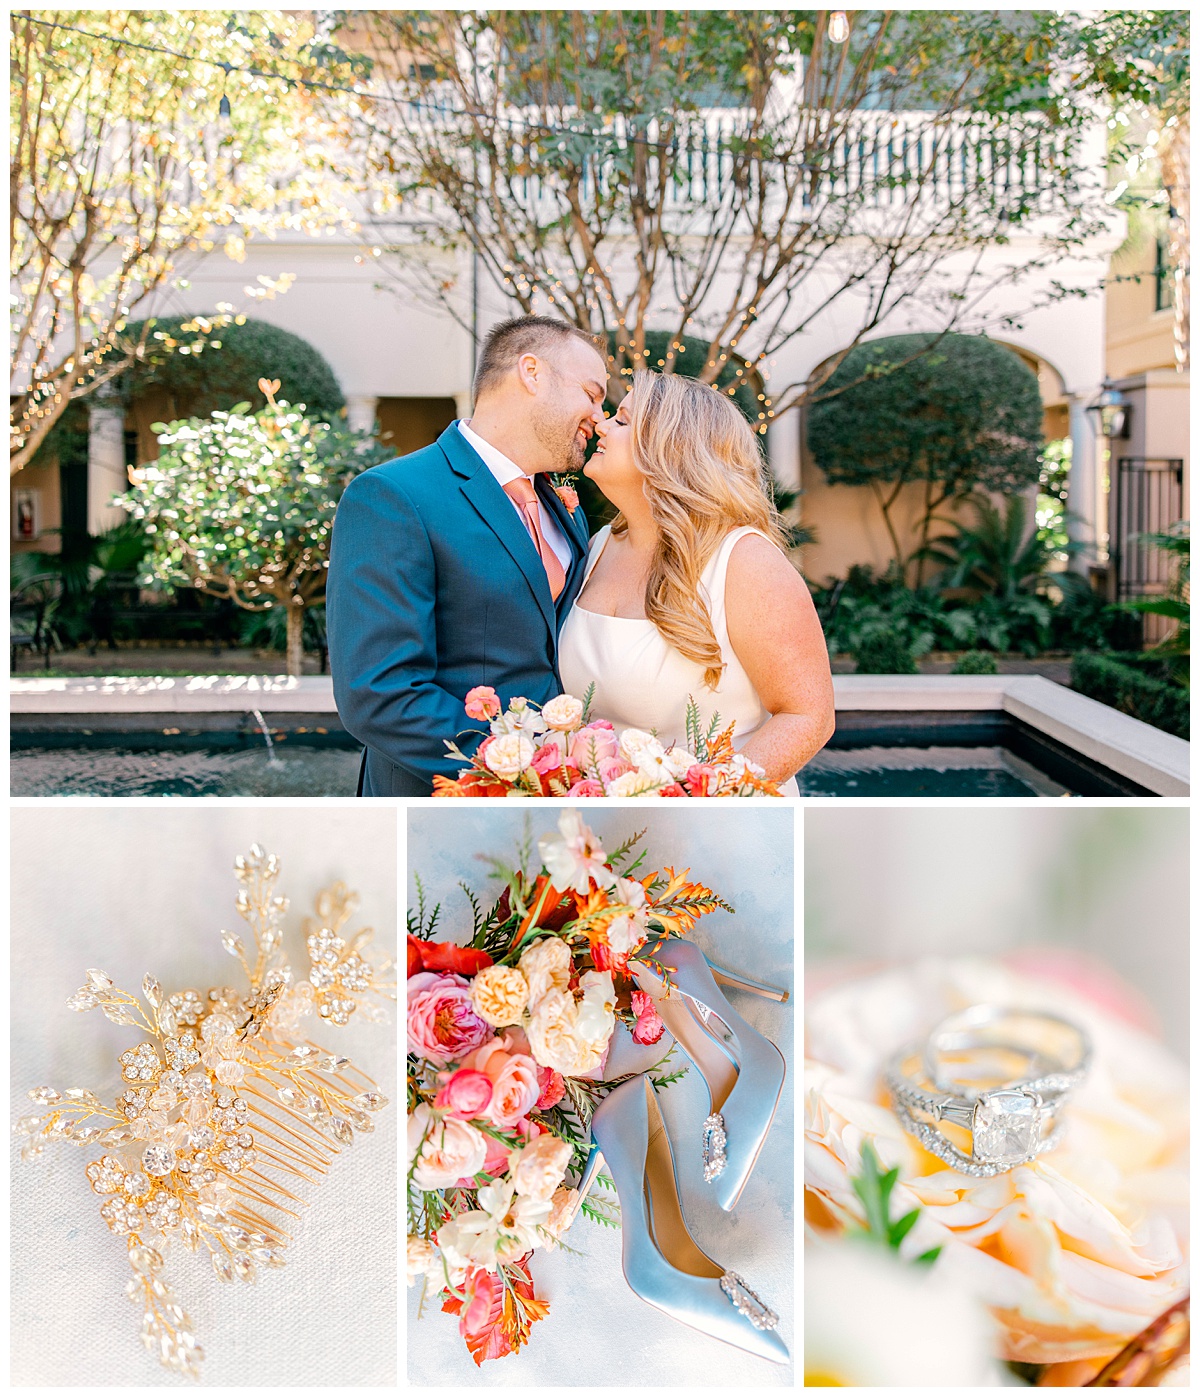 Intimate Planter's Inn wedding with courtyard ceremony and bright florals